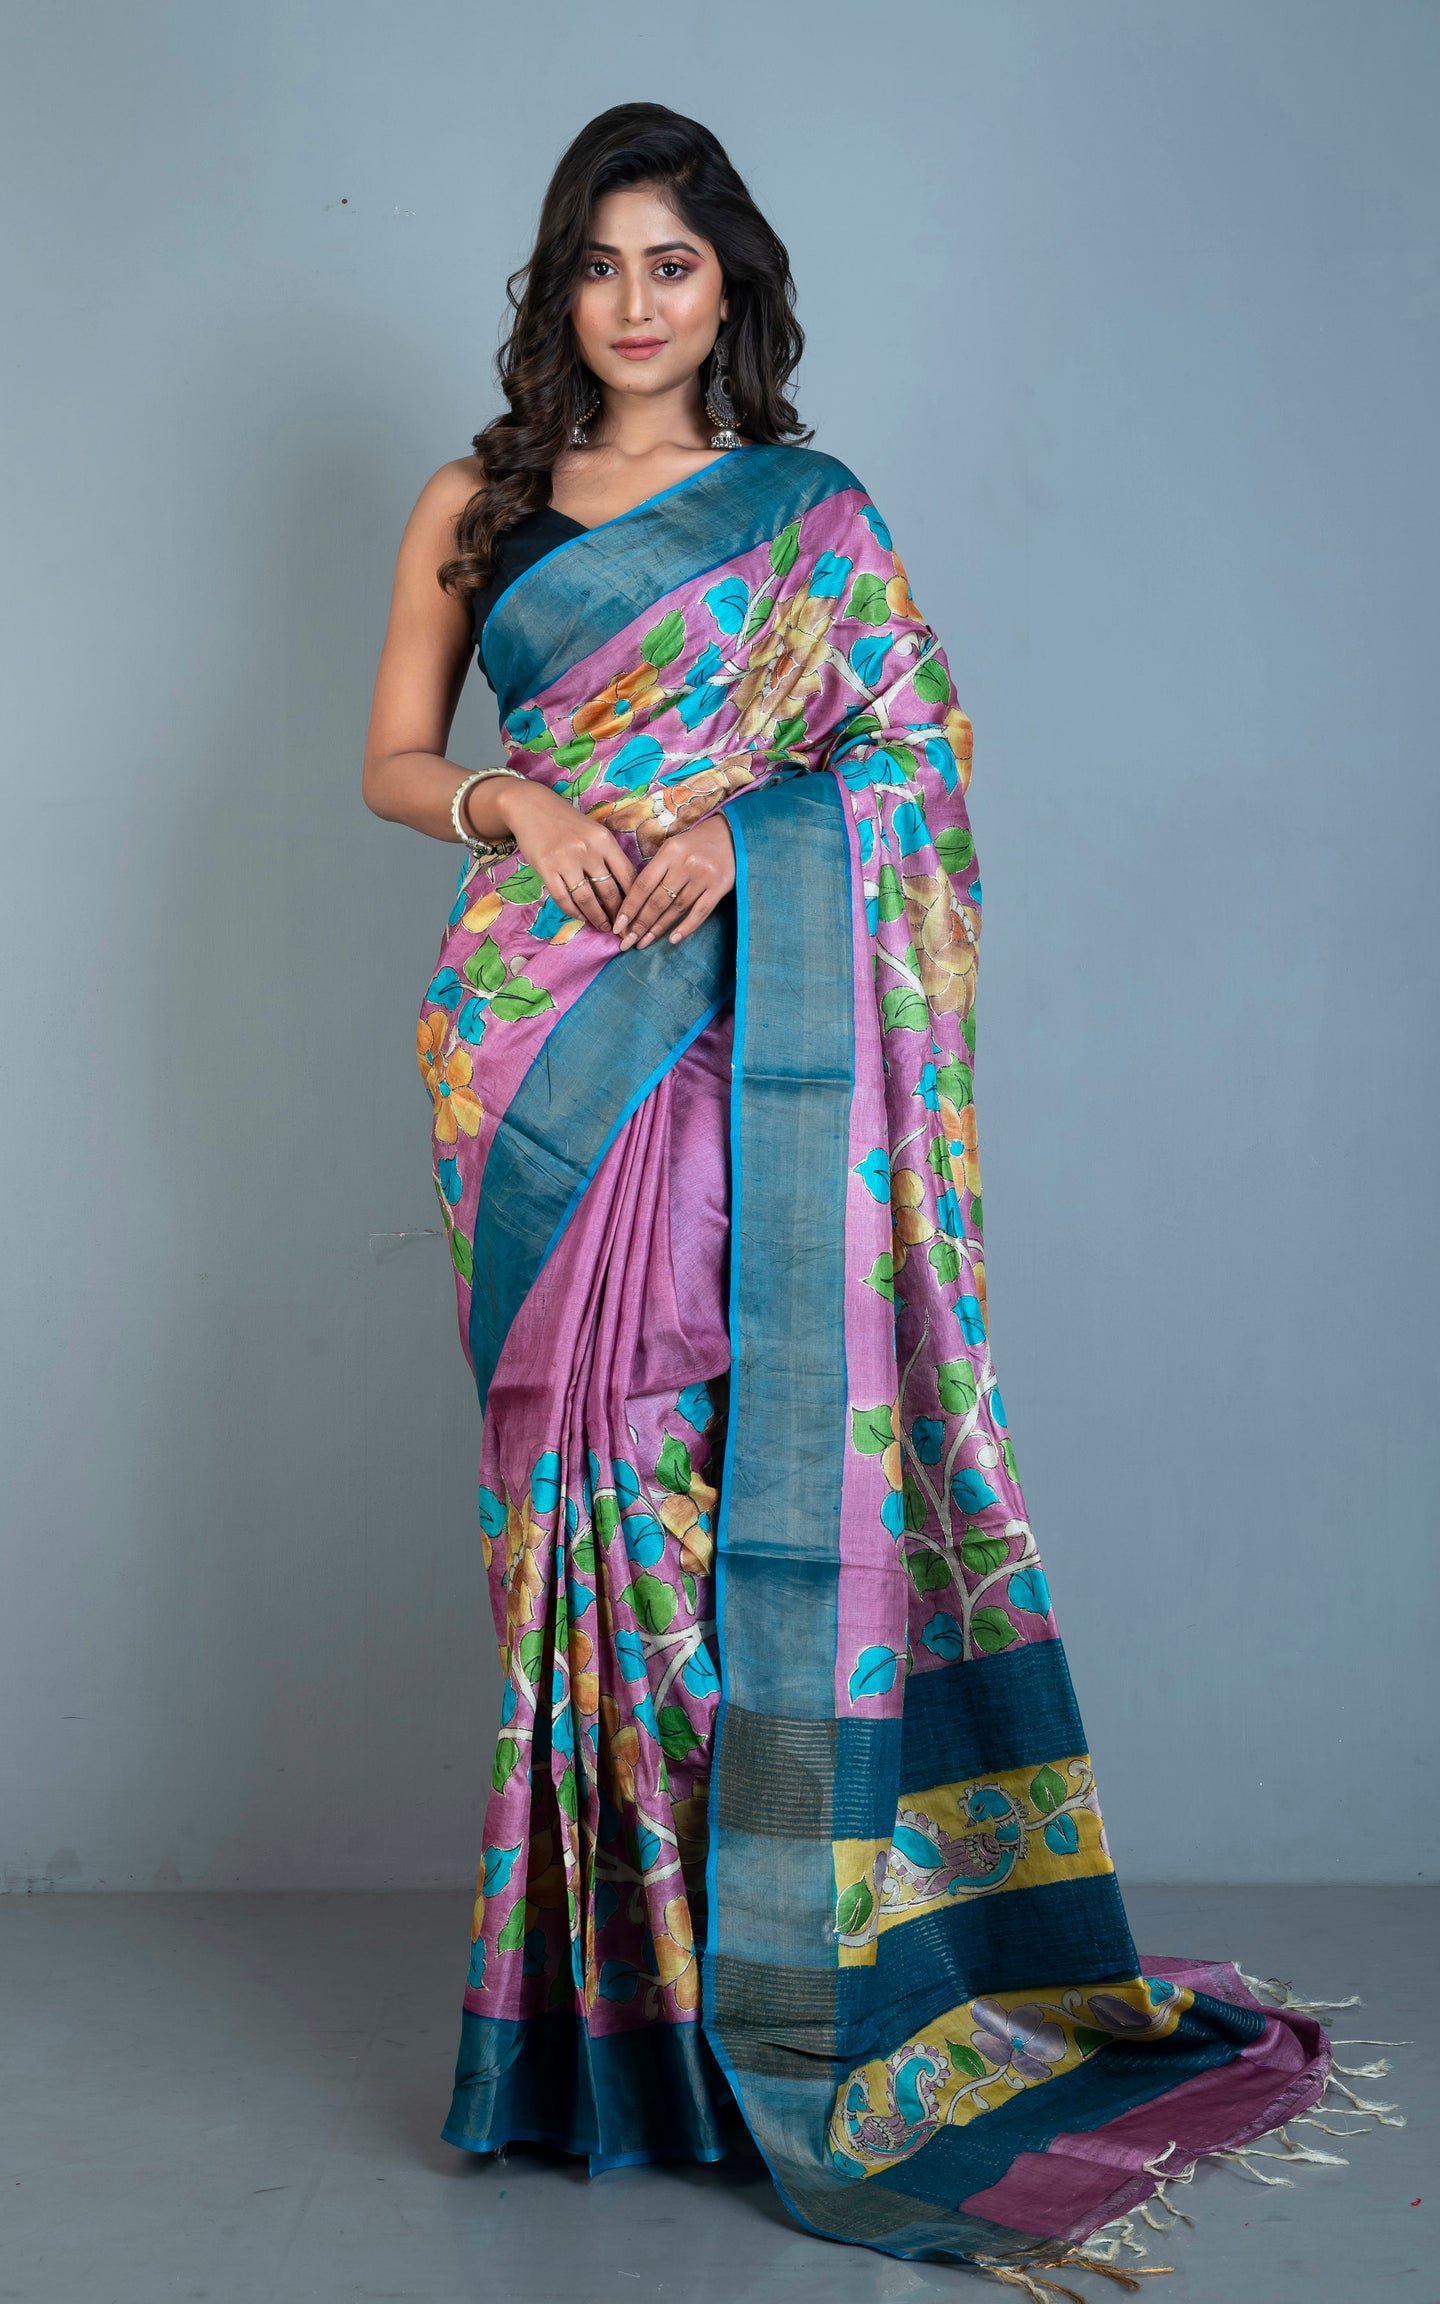 Designer Tussar Silk Saree in Pink Purple, Blue and Multicolored Prints embellished with Silver Zari Hand Embroidery Pitai Work